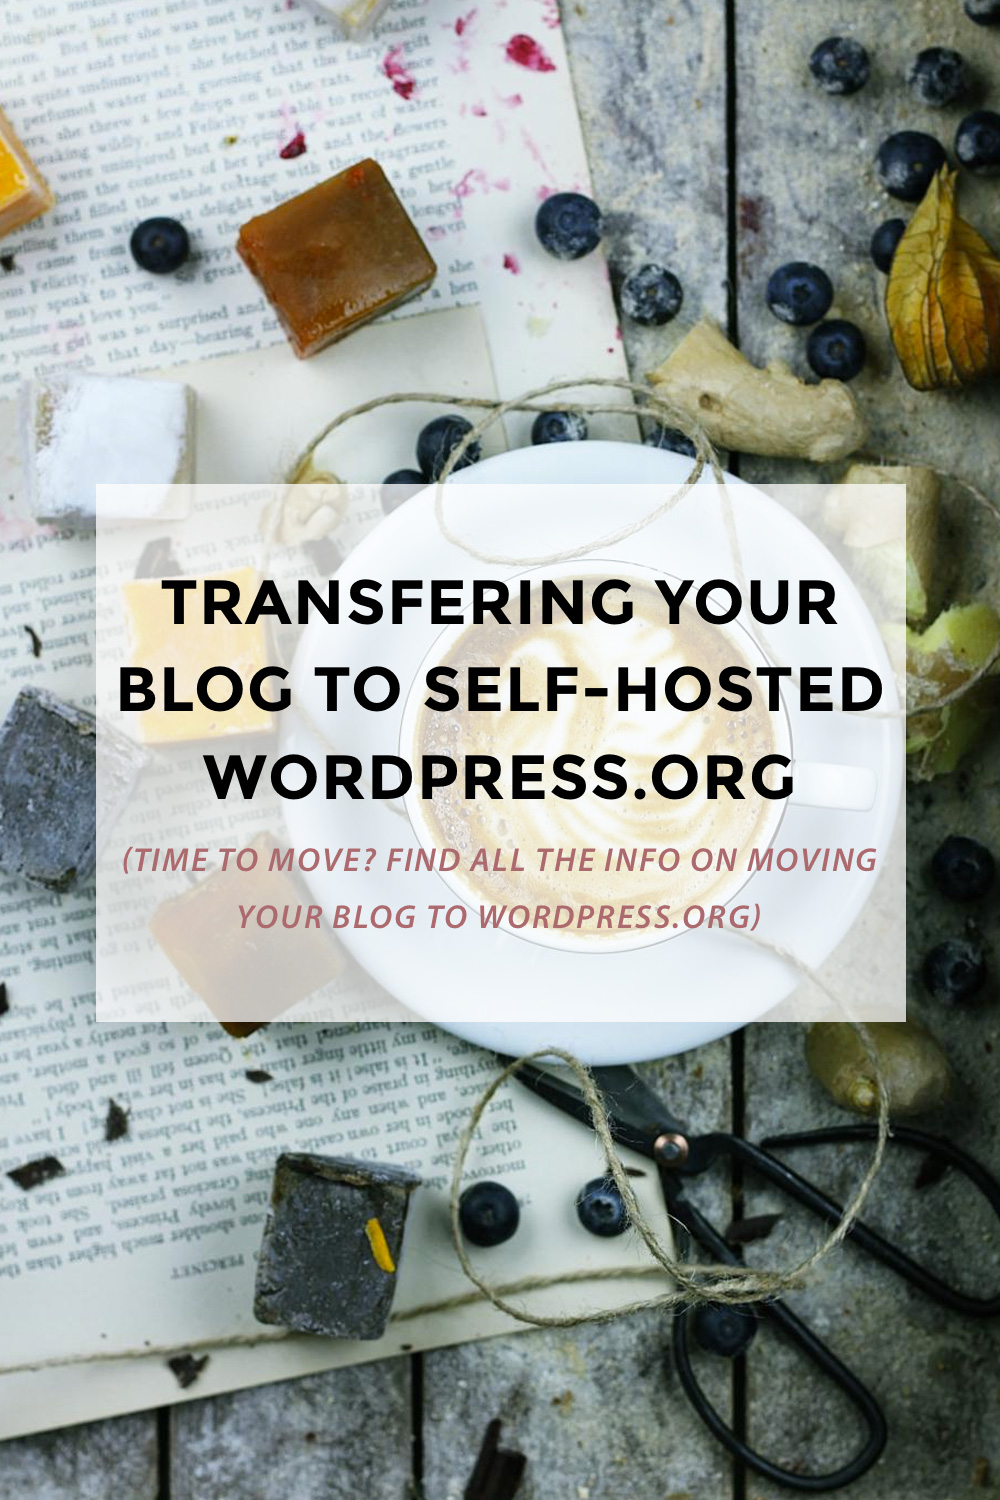 I'm proud to say that I've been using self-hosted Wordpress for ages & to my opinion, it's the best platform out there! No surprise you're thinking about the move! Let me provide you with some best resources for transferring your blog to Wordpress.org (blogger to wordpress tutorial, wordpress.com to wordpress.org, squarespace to wordpress, blogging tips, blogging 101)